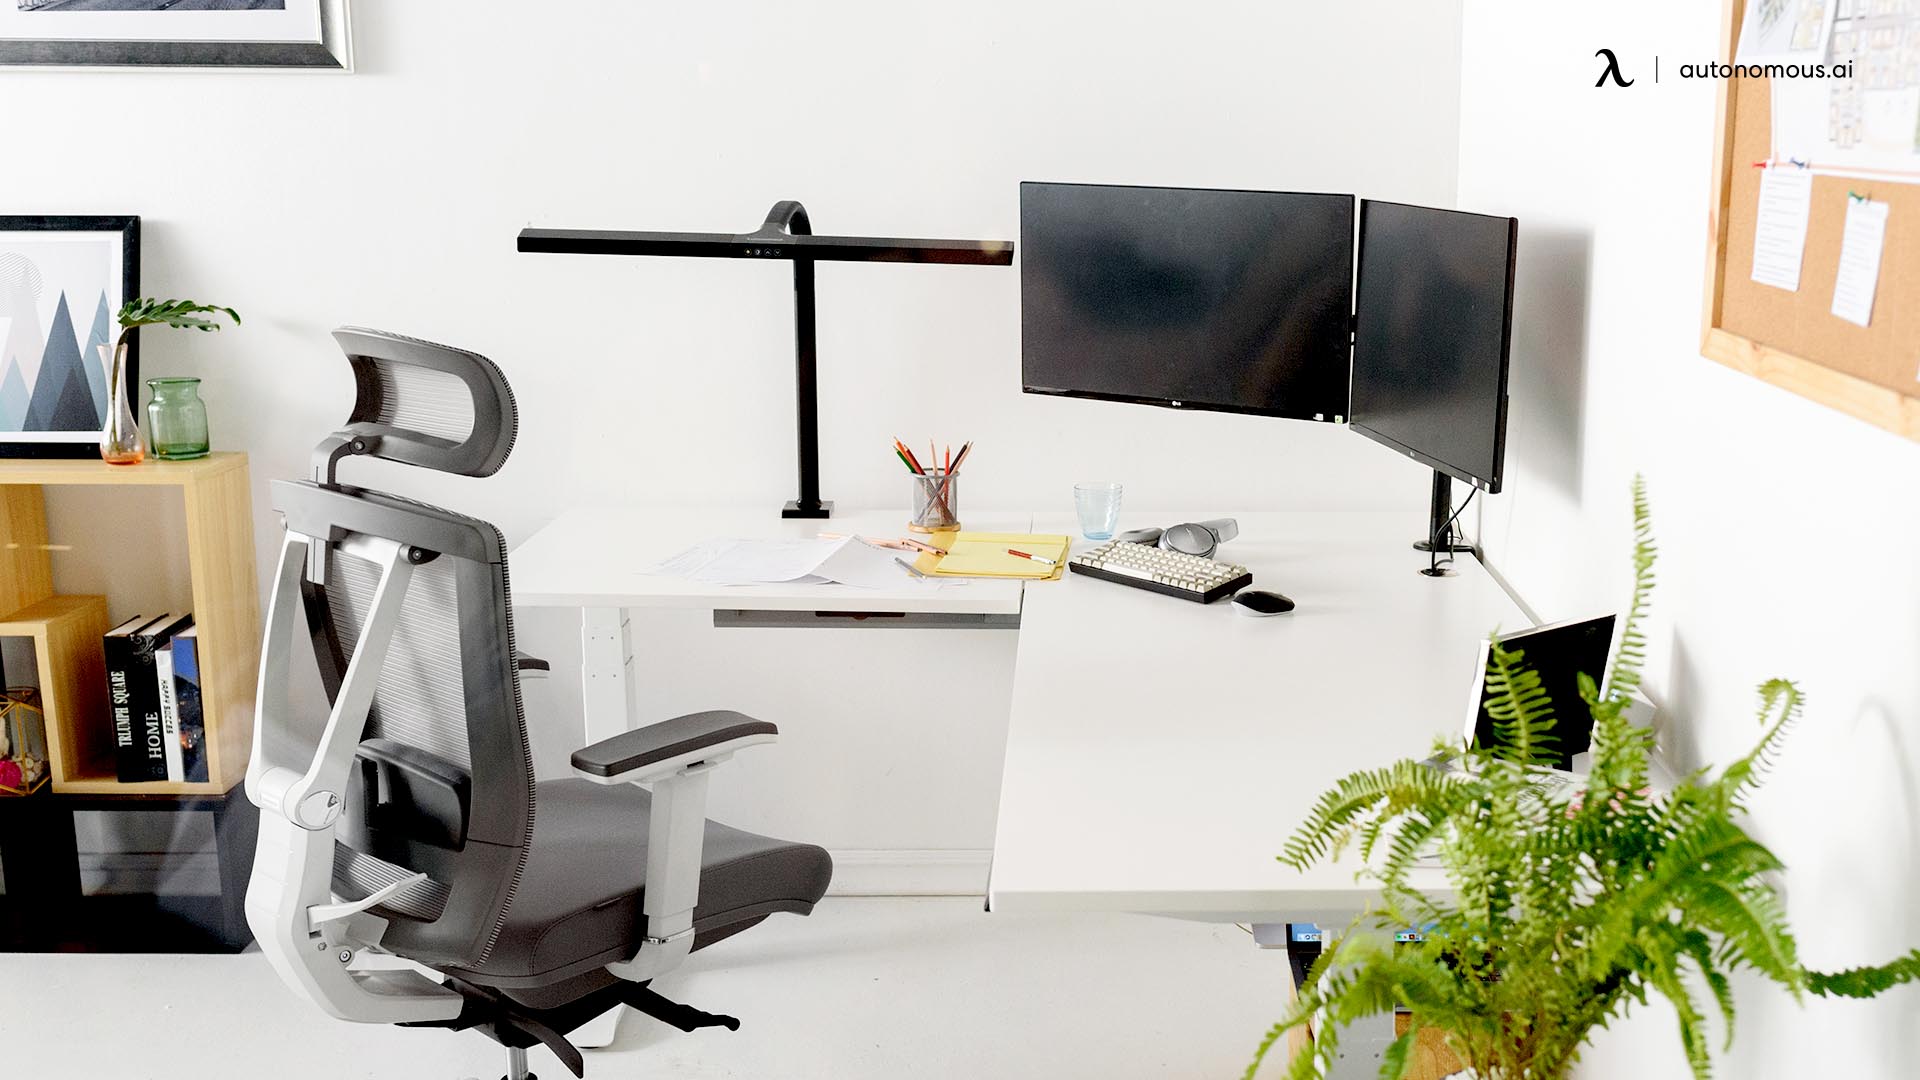 Consider Using an L-Shaped Desk for multi-computer screen setup